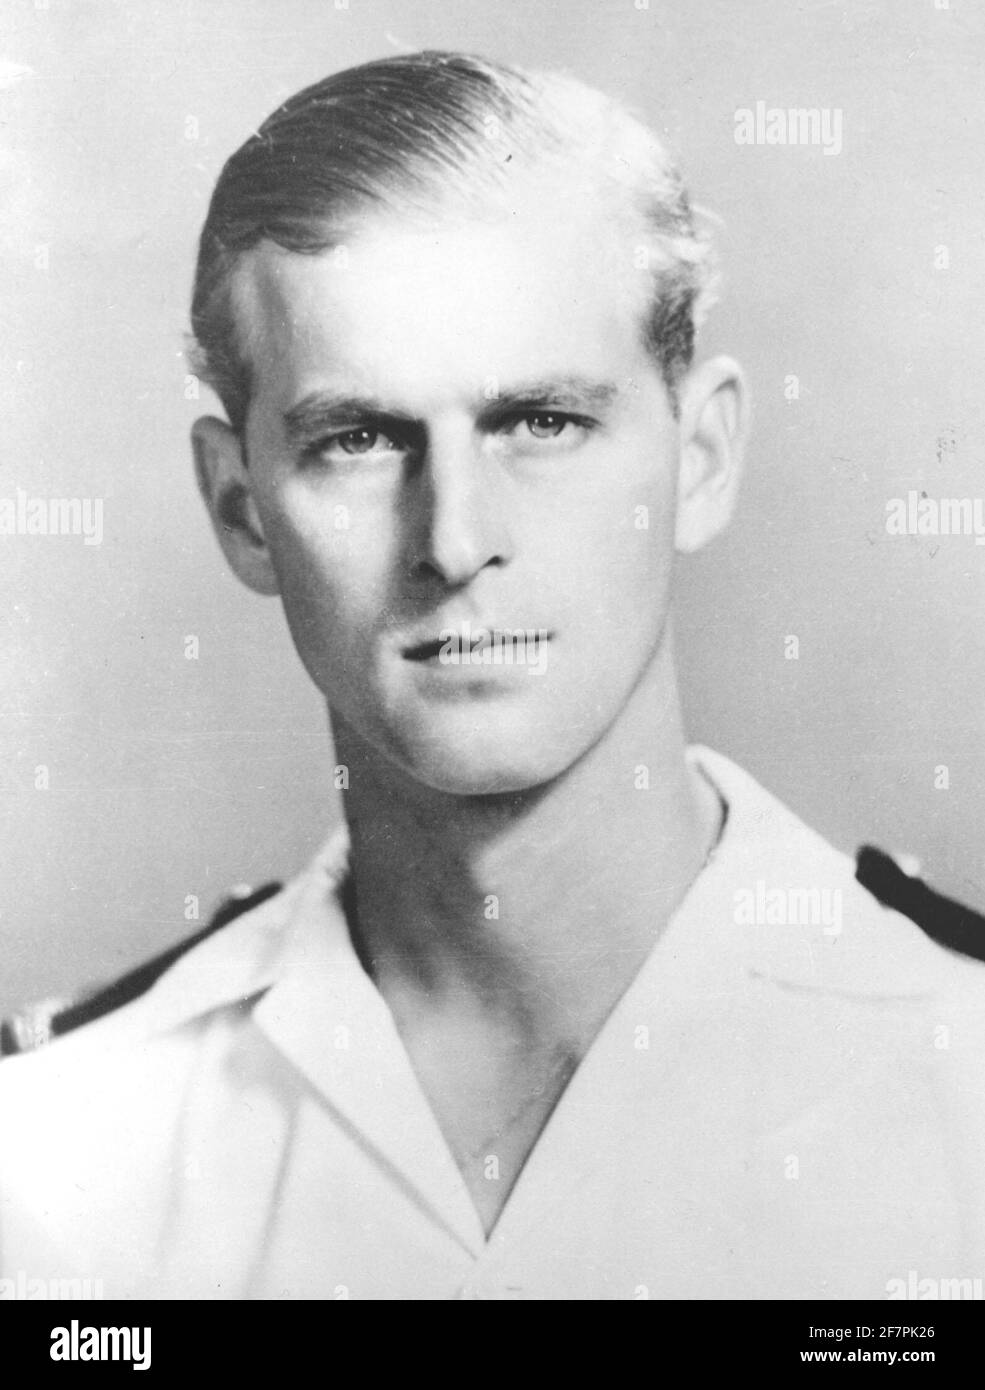 File photo dated 01/05/51 of The Duke of Edinburgh as Commander of the Frigate HMS Magpie in 1951. Philip joined the Navy after leaving school and in May 1939 enrolled at the Royal Naval College in Dartmouth, where he was singled out as best cadet. He rose rapidly through the ranks, earning promotion after promotion, but his life was to take a very different course. The dukeÕs flourishing naval career came to a premature end in 1951. Philip stepped down from his active role in the forces to fulfil his duty as consort. Issue date: Friday April 4, 2021. Stock Photo